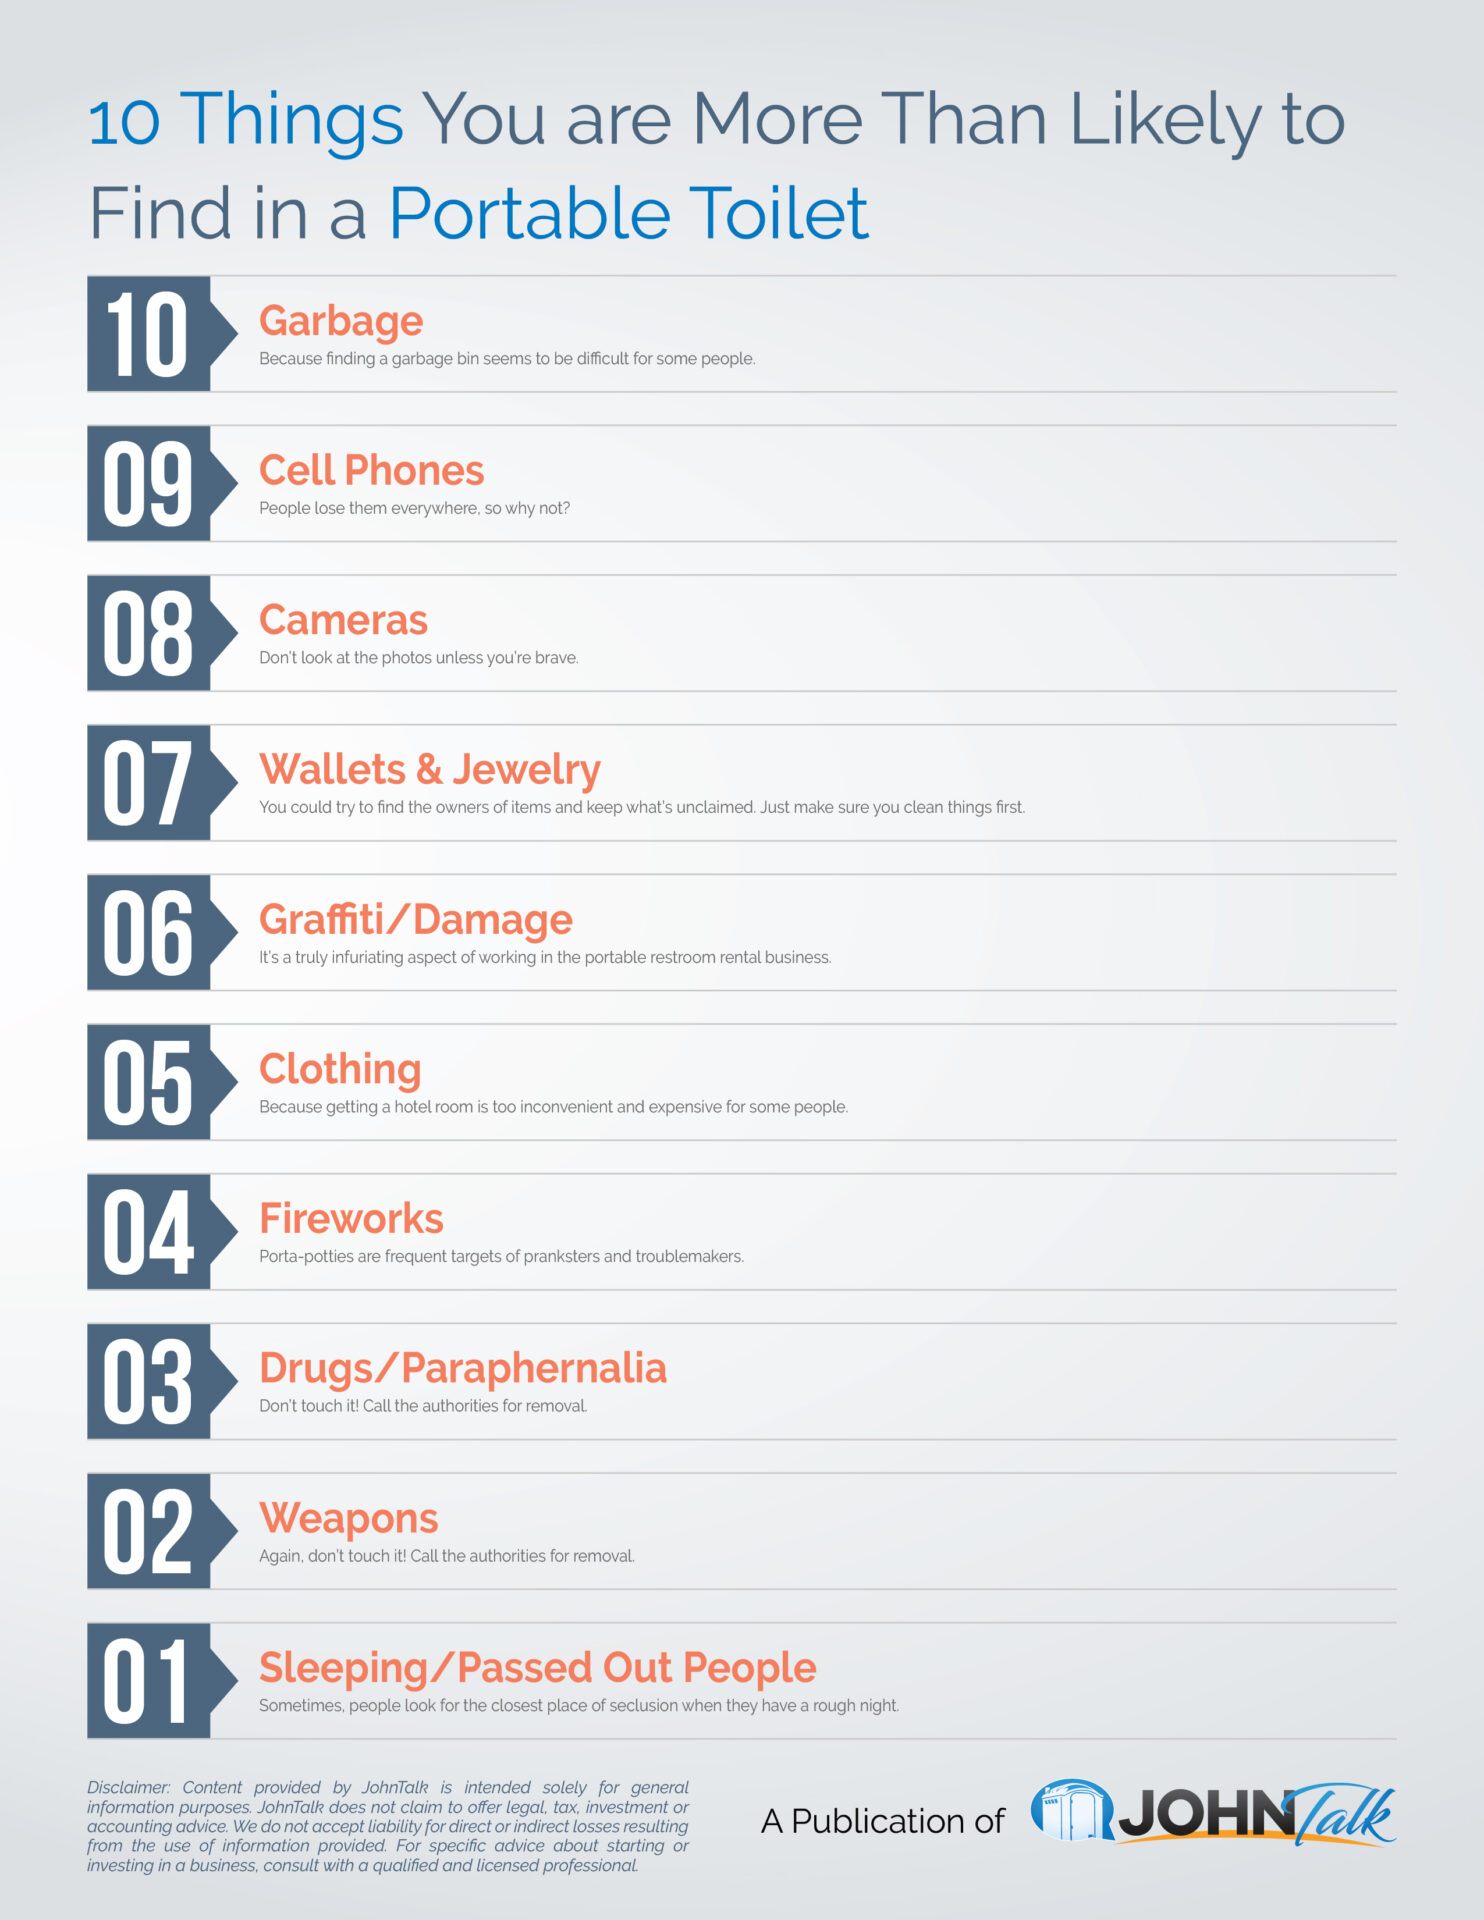 10 Things You are More Than Likely to Find in a Portable Toilet